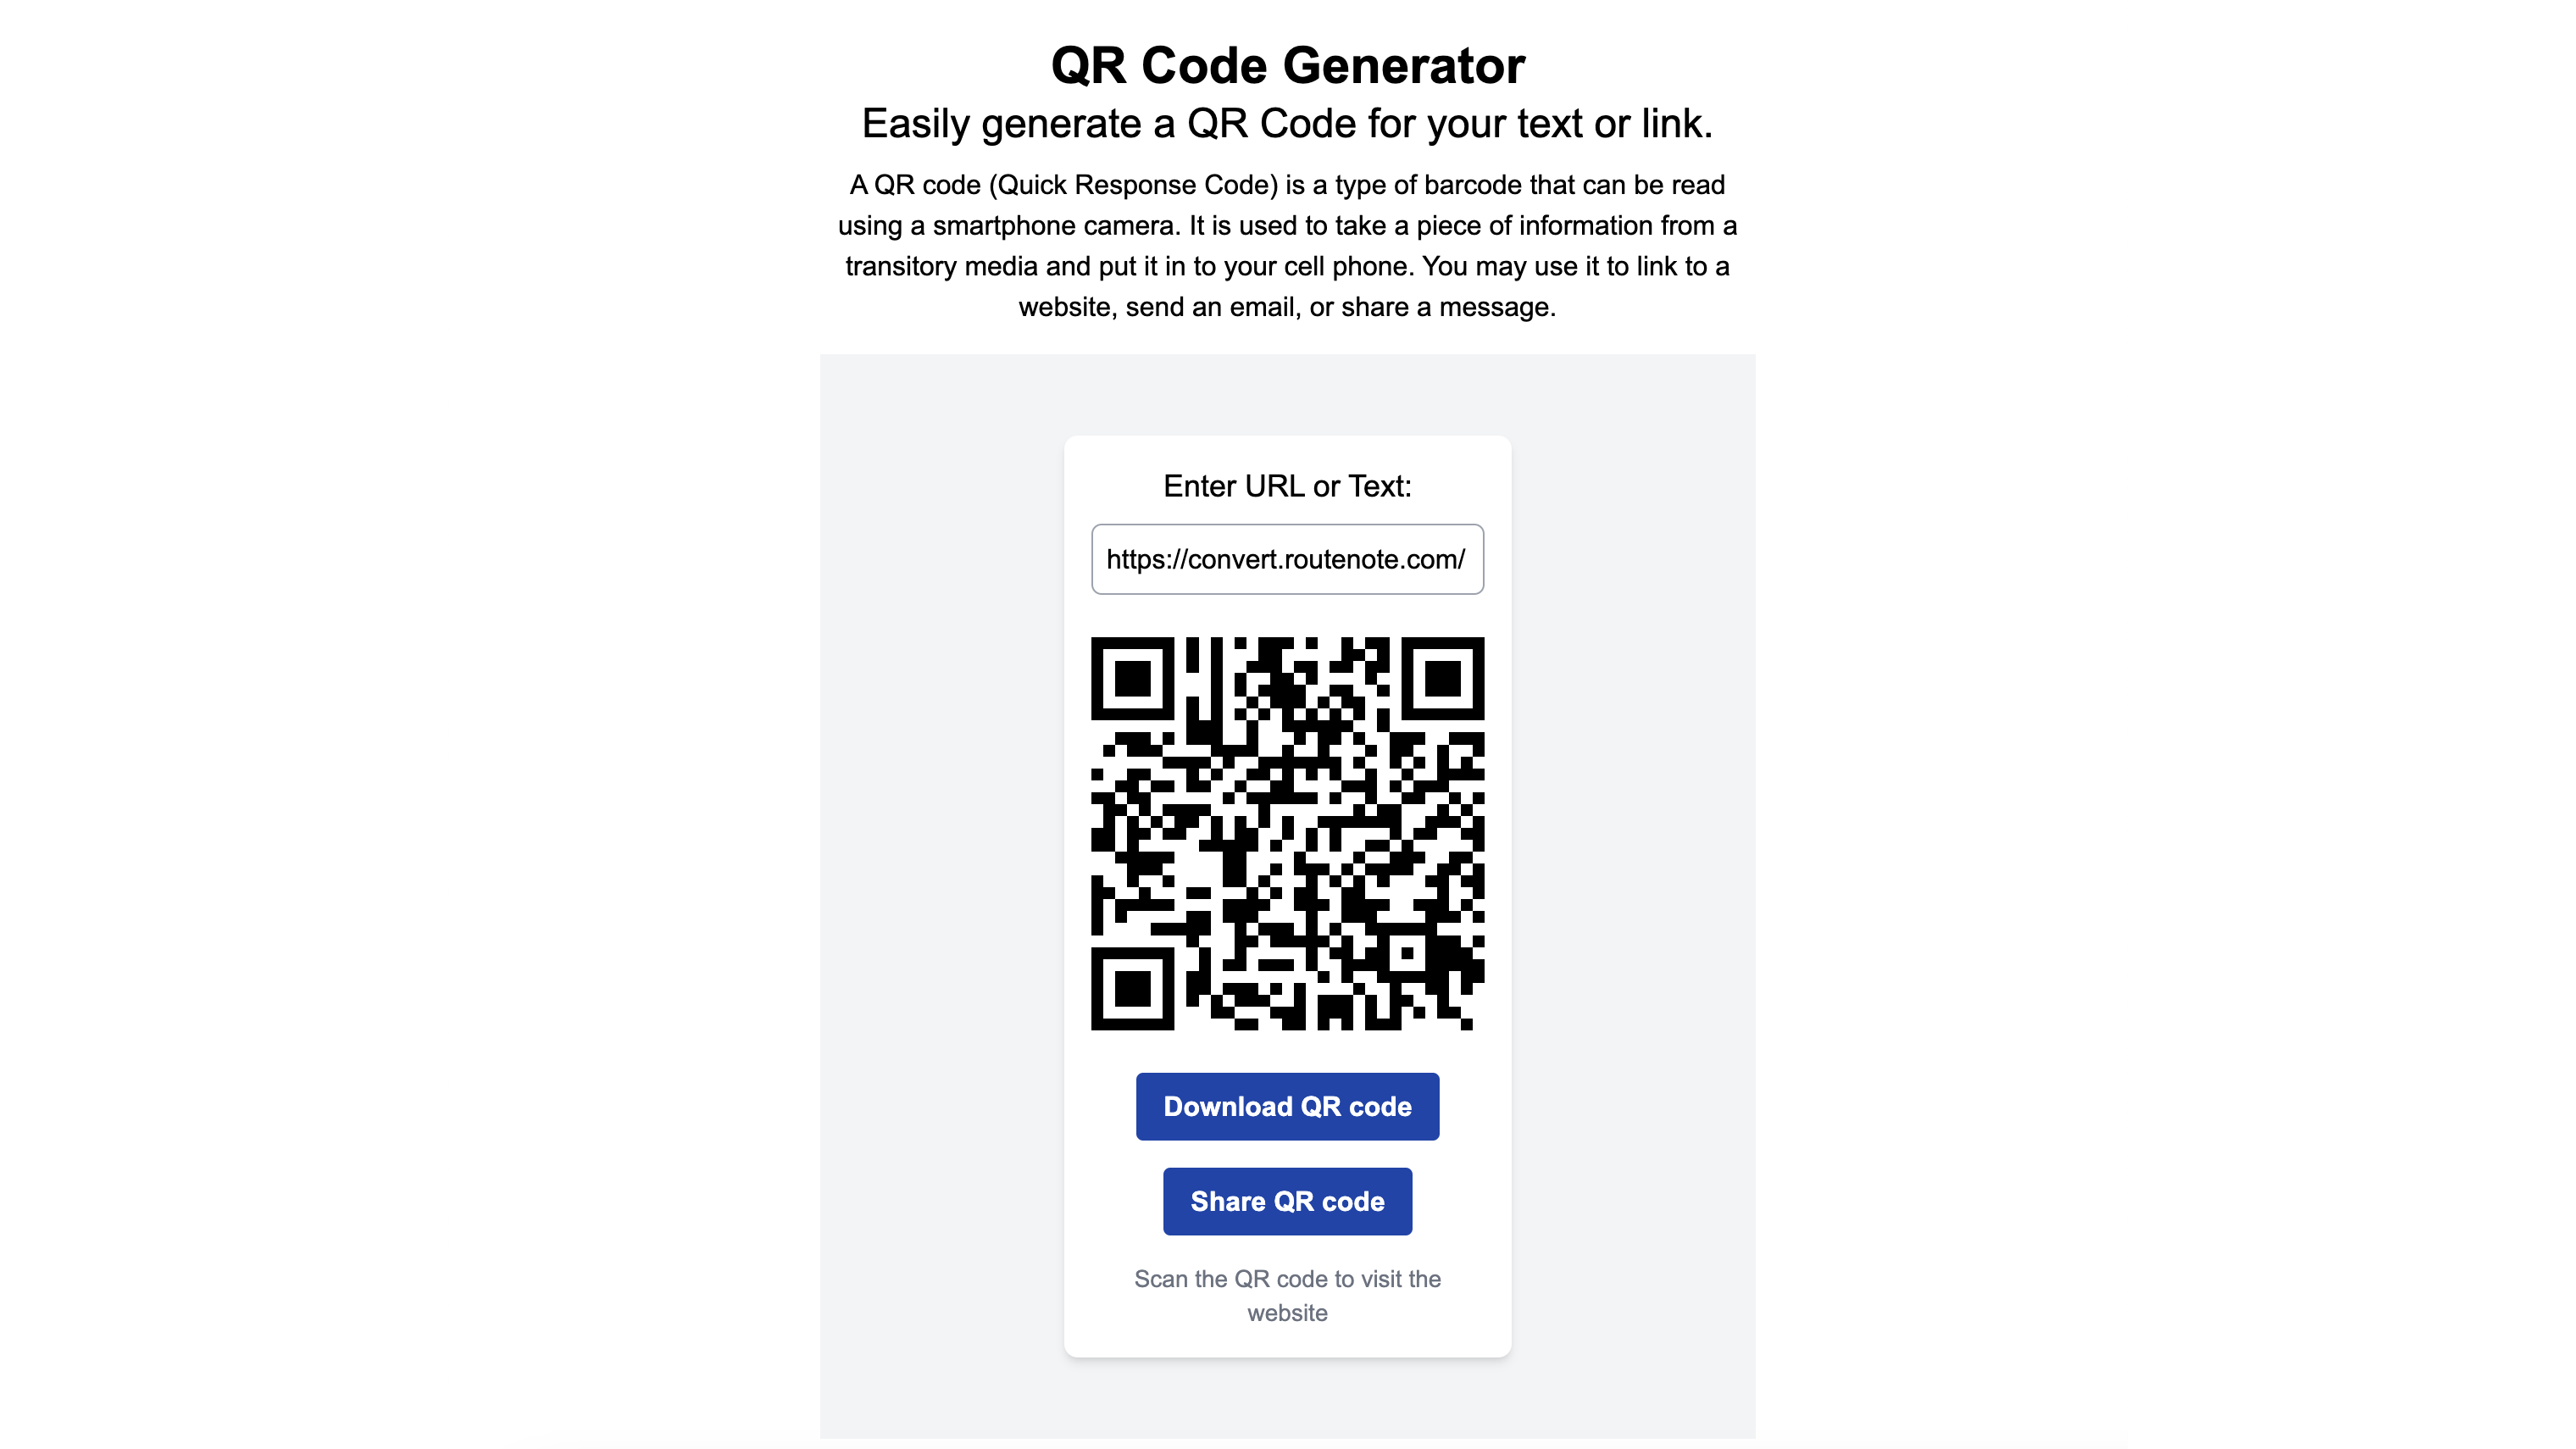 RouteNote Convert – How to create a QR code for free